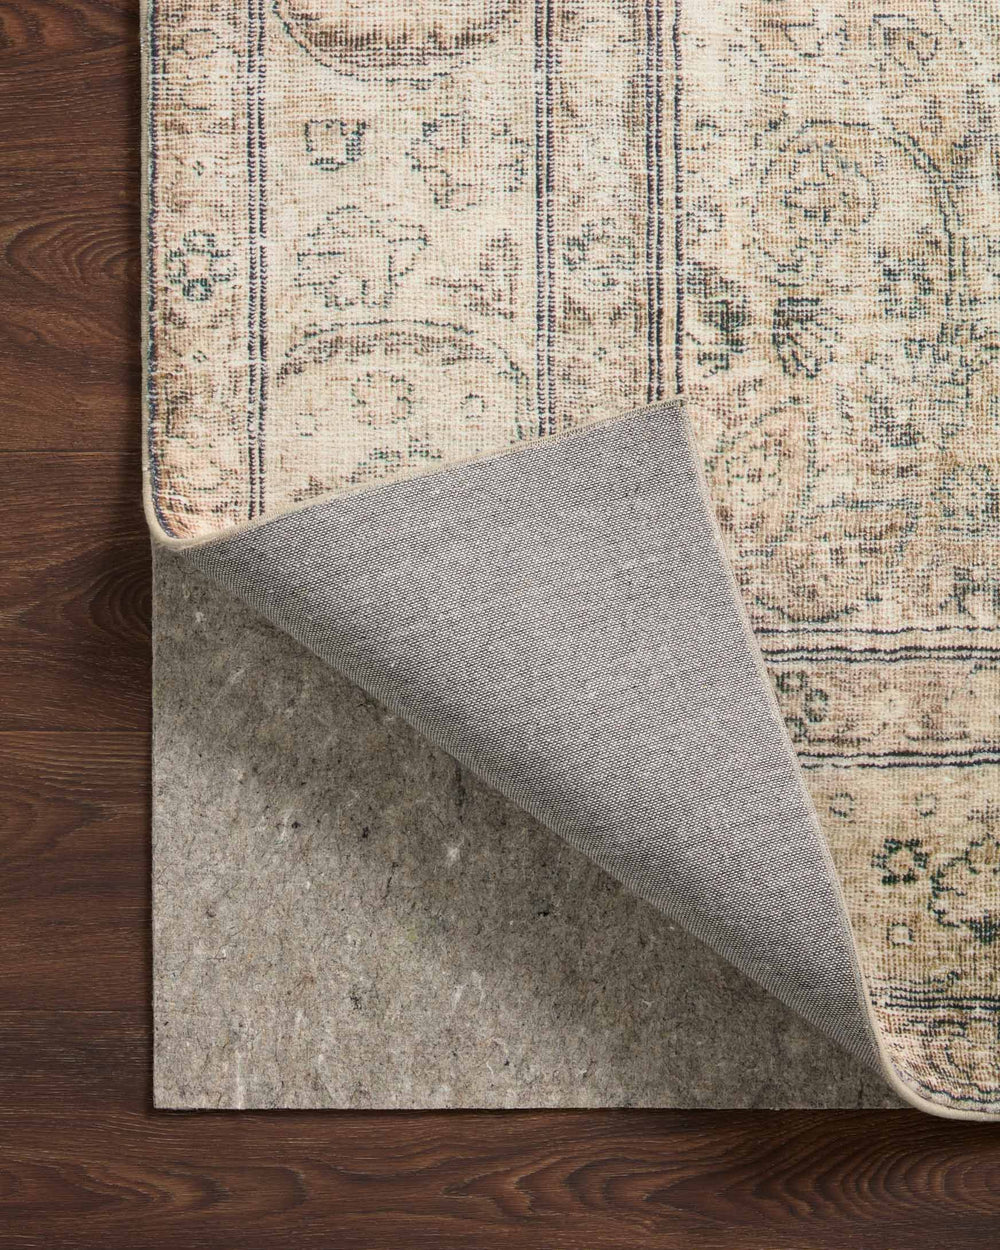 Rug Grip Natural Non Slip Rug Pad by Slip-Stop - Taupe - 4' x 6